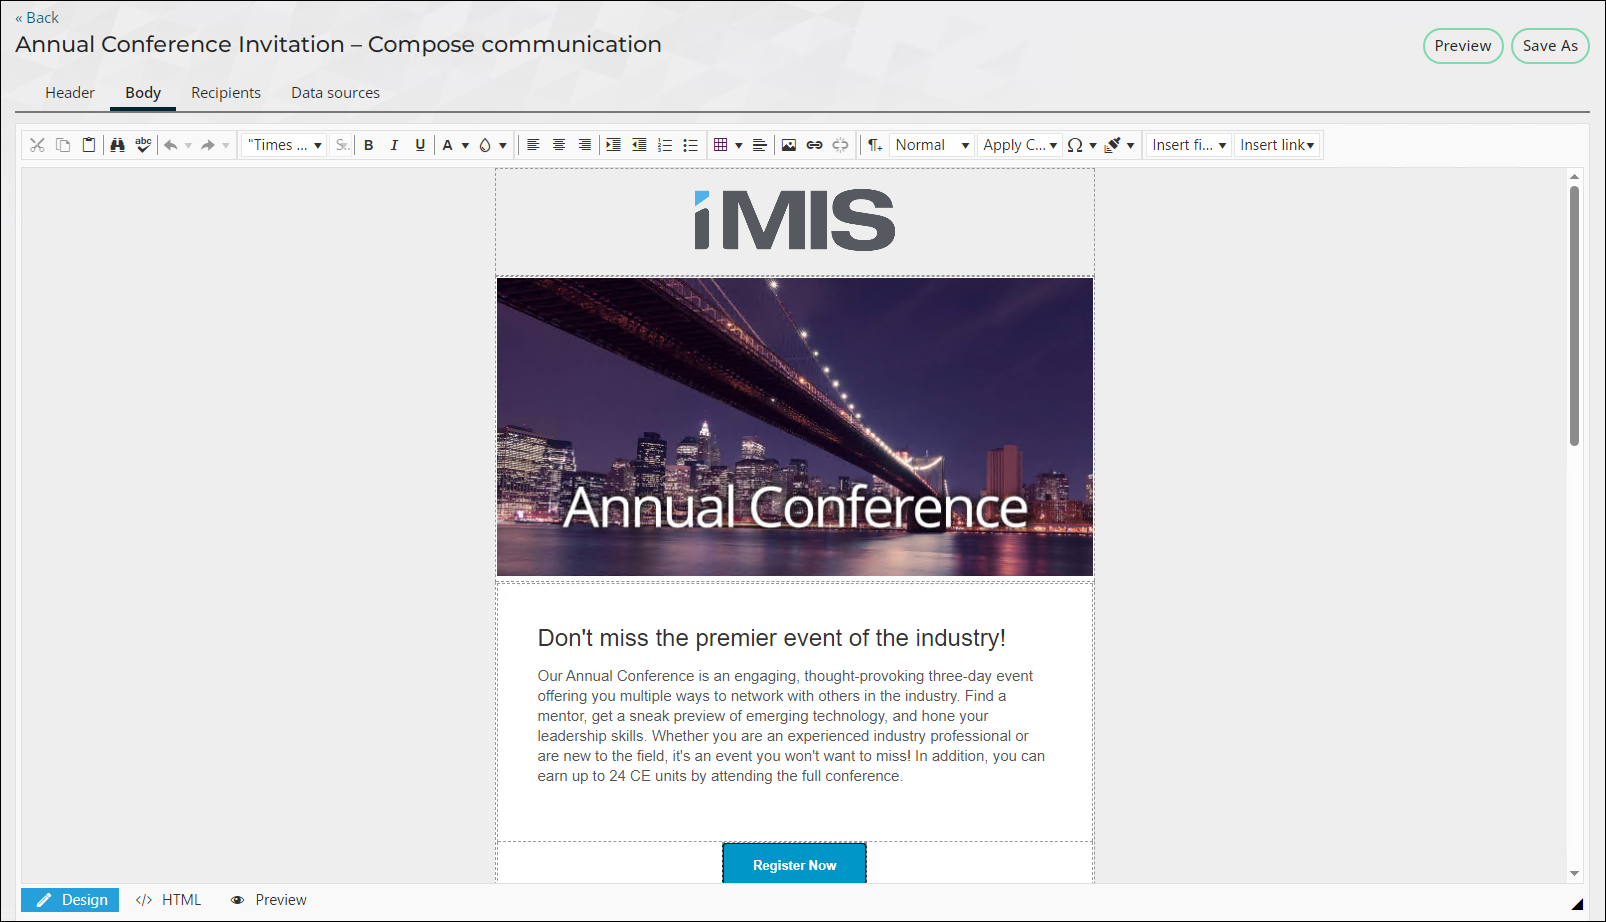 Composing the body of the Annual Conference Invitation communication